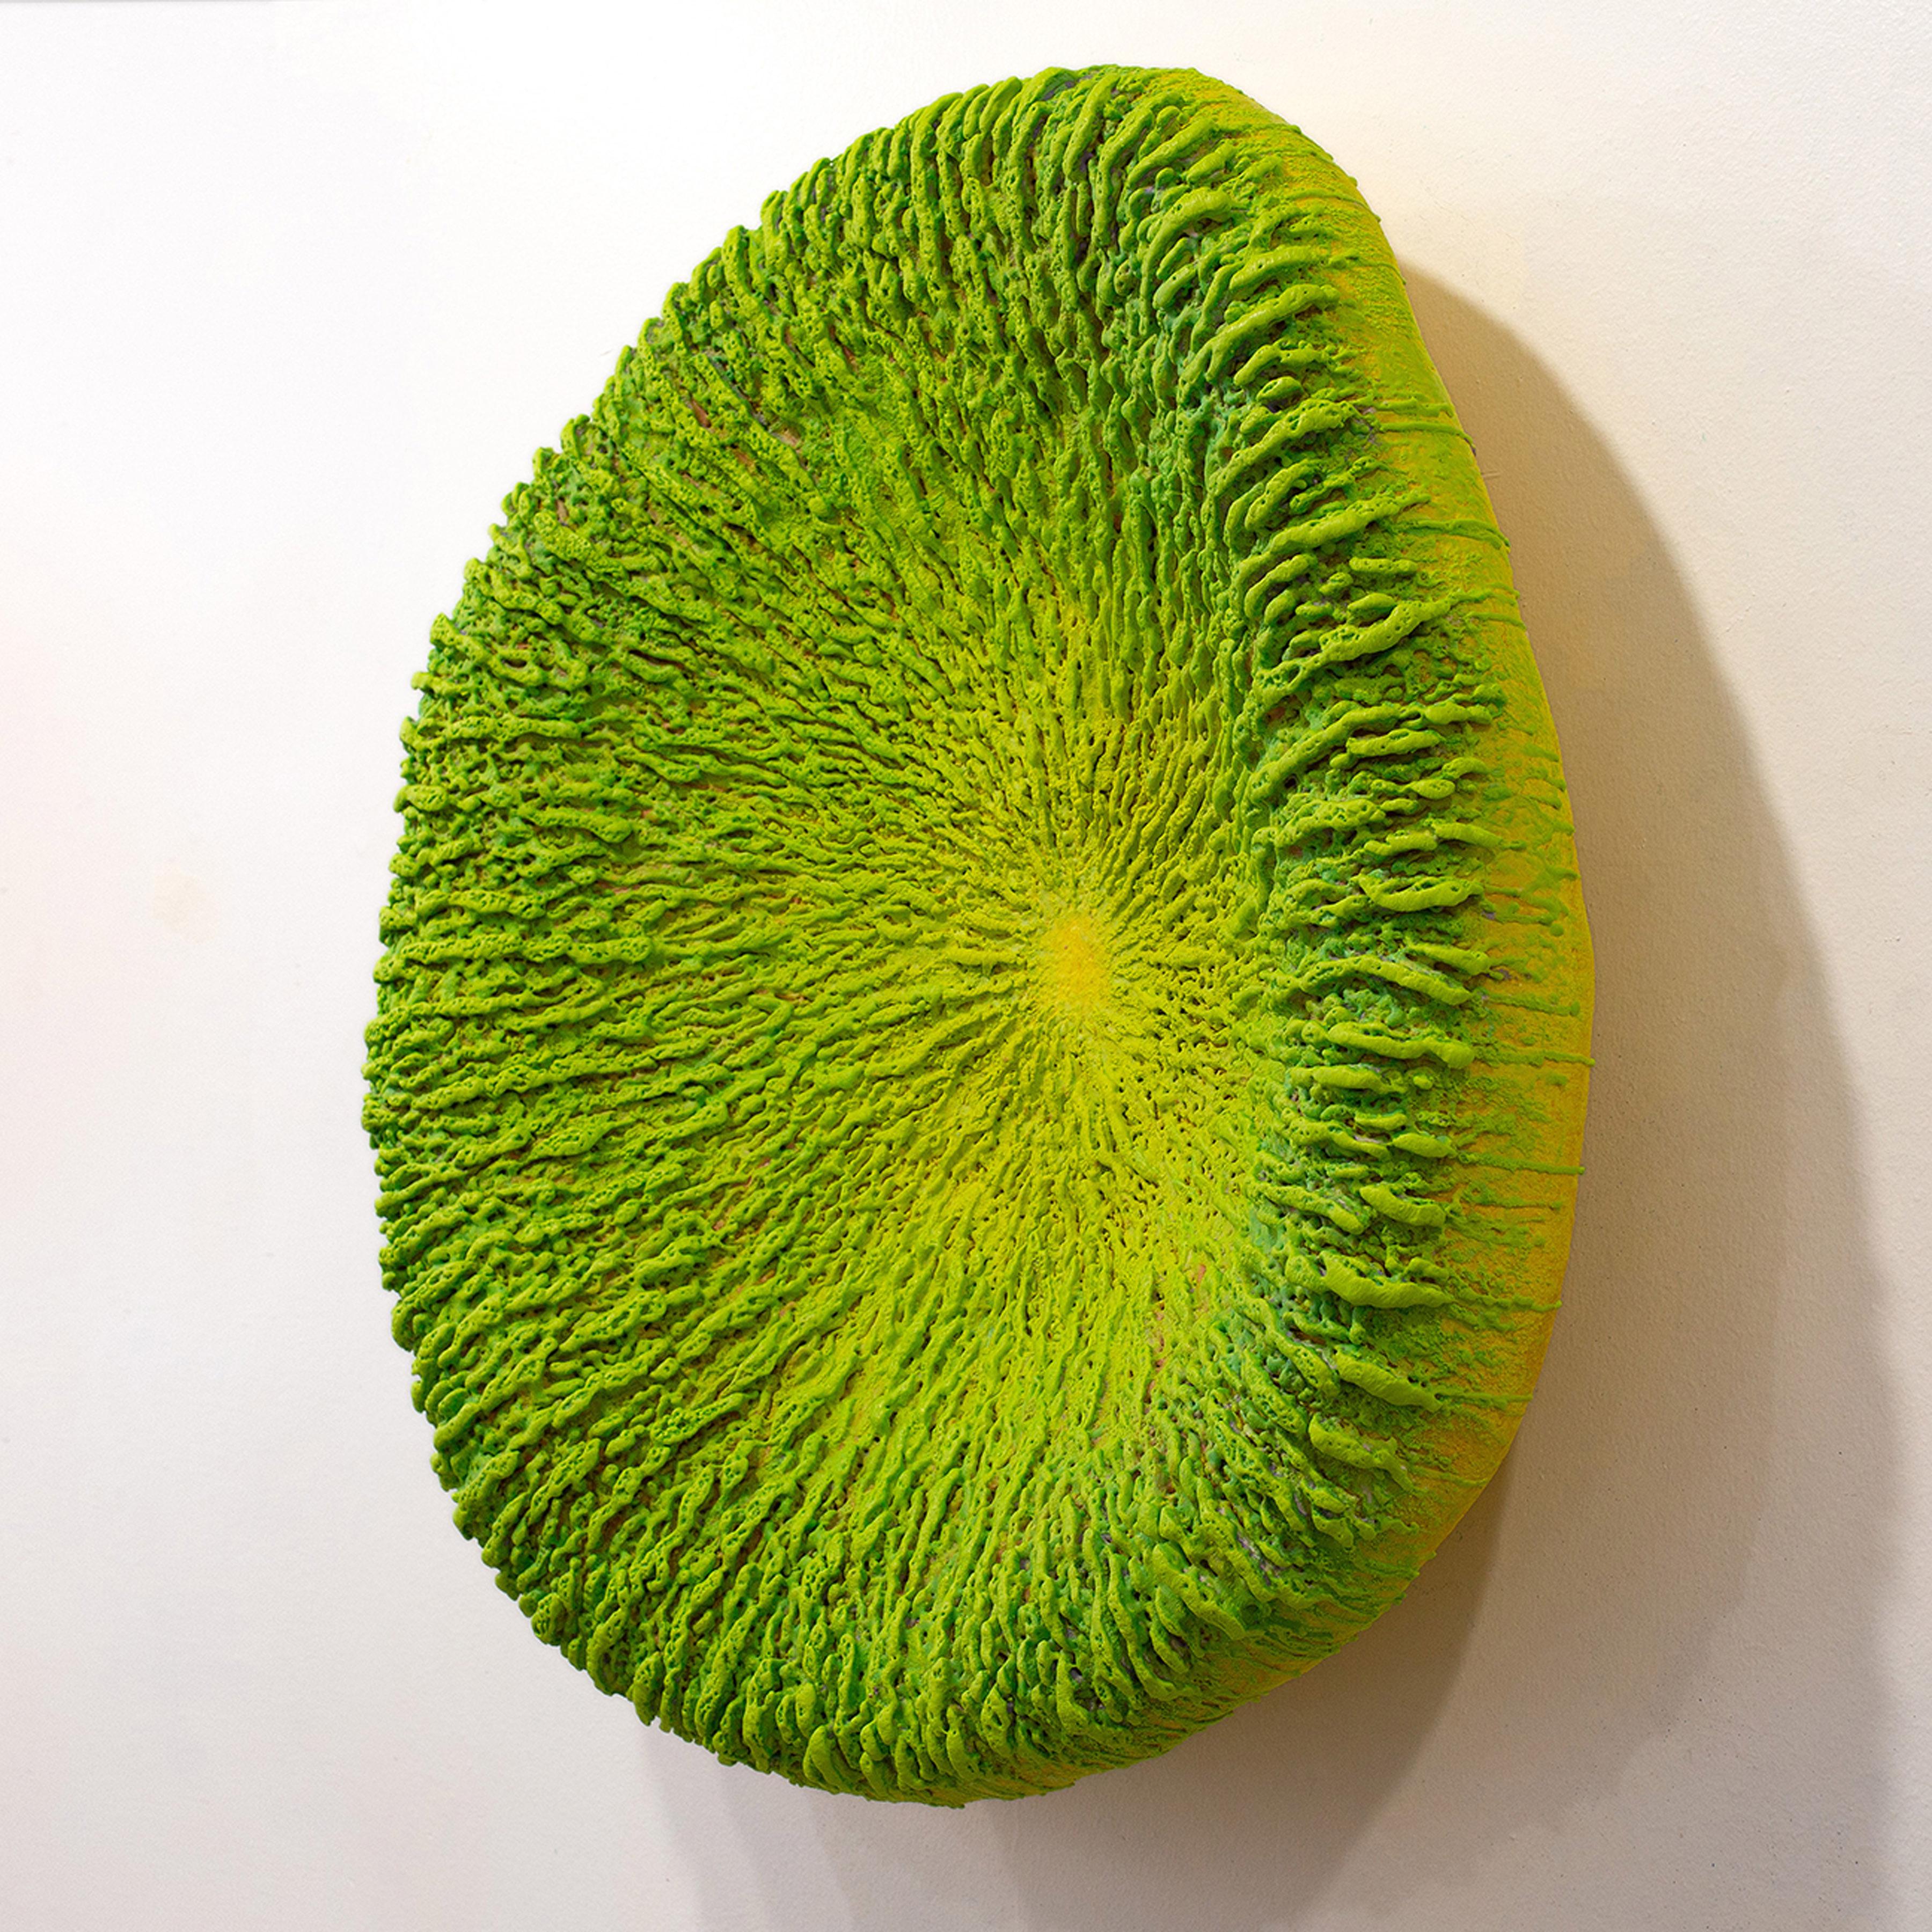 This minimalist green 3D wall piece is by Barry Katz. He creates pieces that allude to the artist looking into a mirror. And in particular, one which reflects inner states. Not a mirror that flatters, far from, but one that tells inescapable truths.